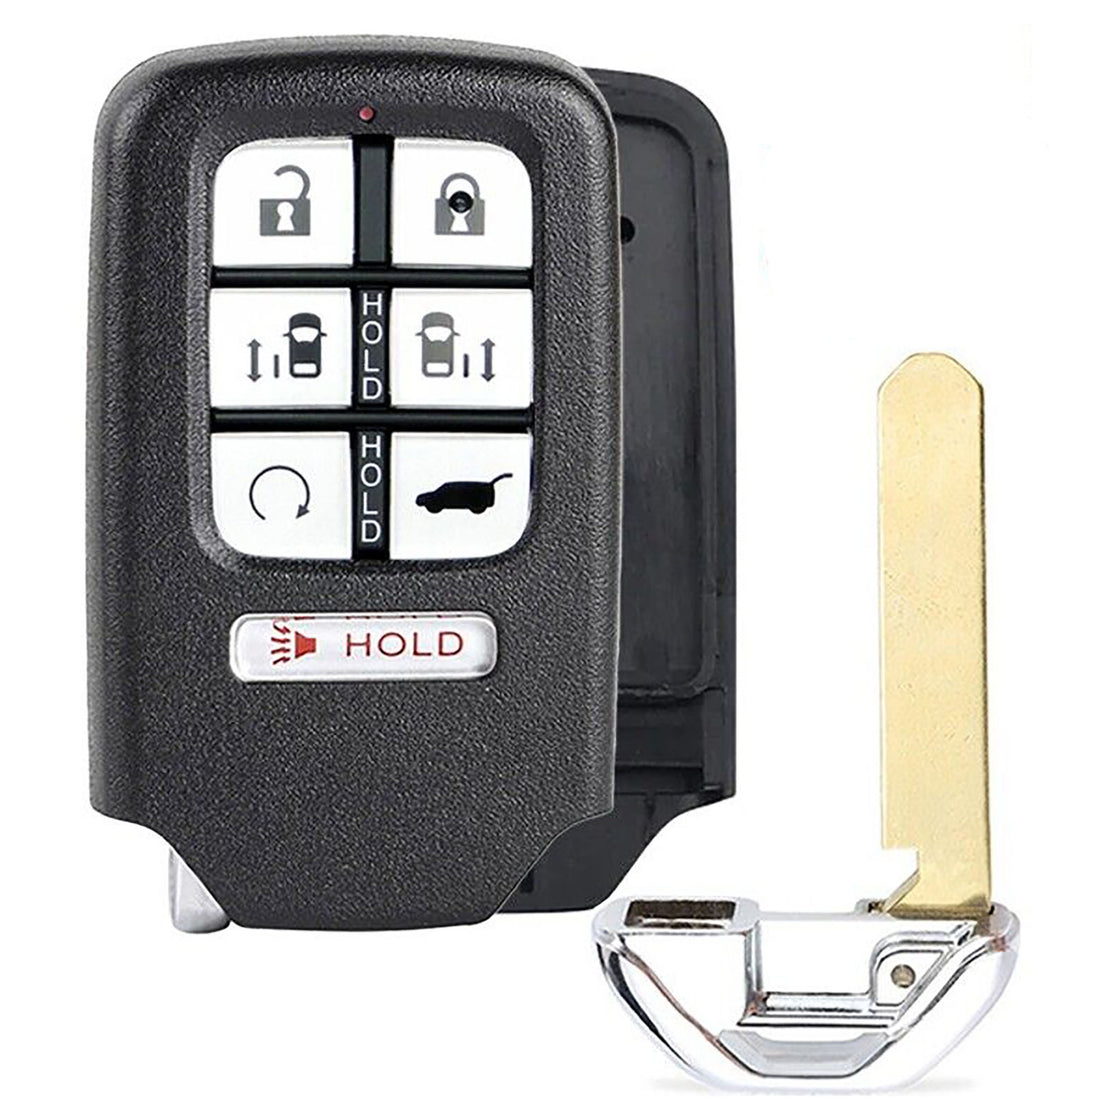 1x New Replacement Proximity Key Fob SHELL / CASE Compatible with & Fit For Honda Vehicles - MPN KR5V2X-SHELL-02 (NO electronics or Chip inside)